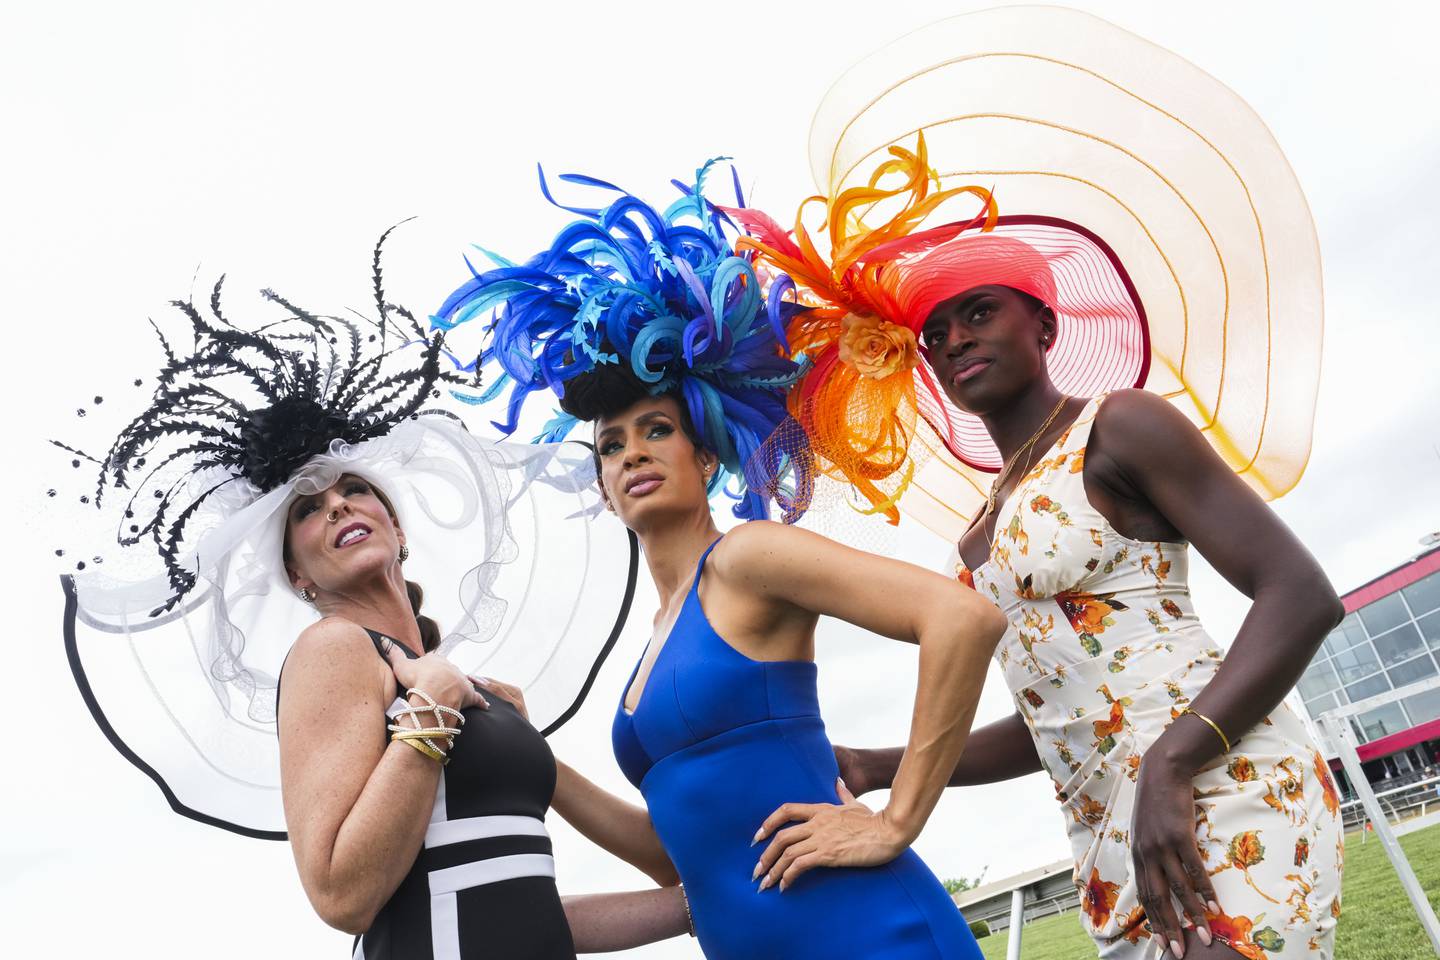 Scenes around Pimlico Race Course during the 148th running of the Preakness Stakes on May 20, 2023.